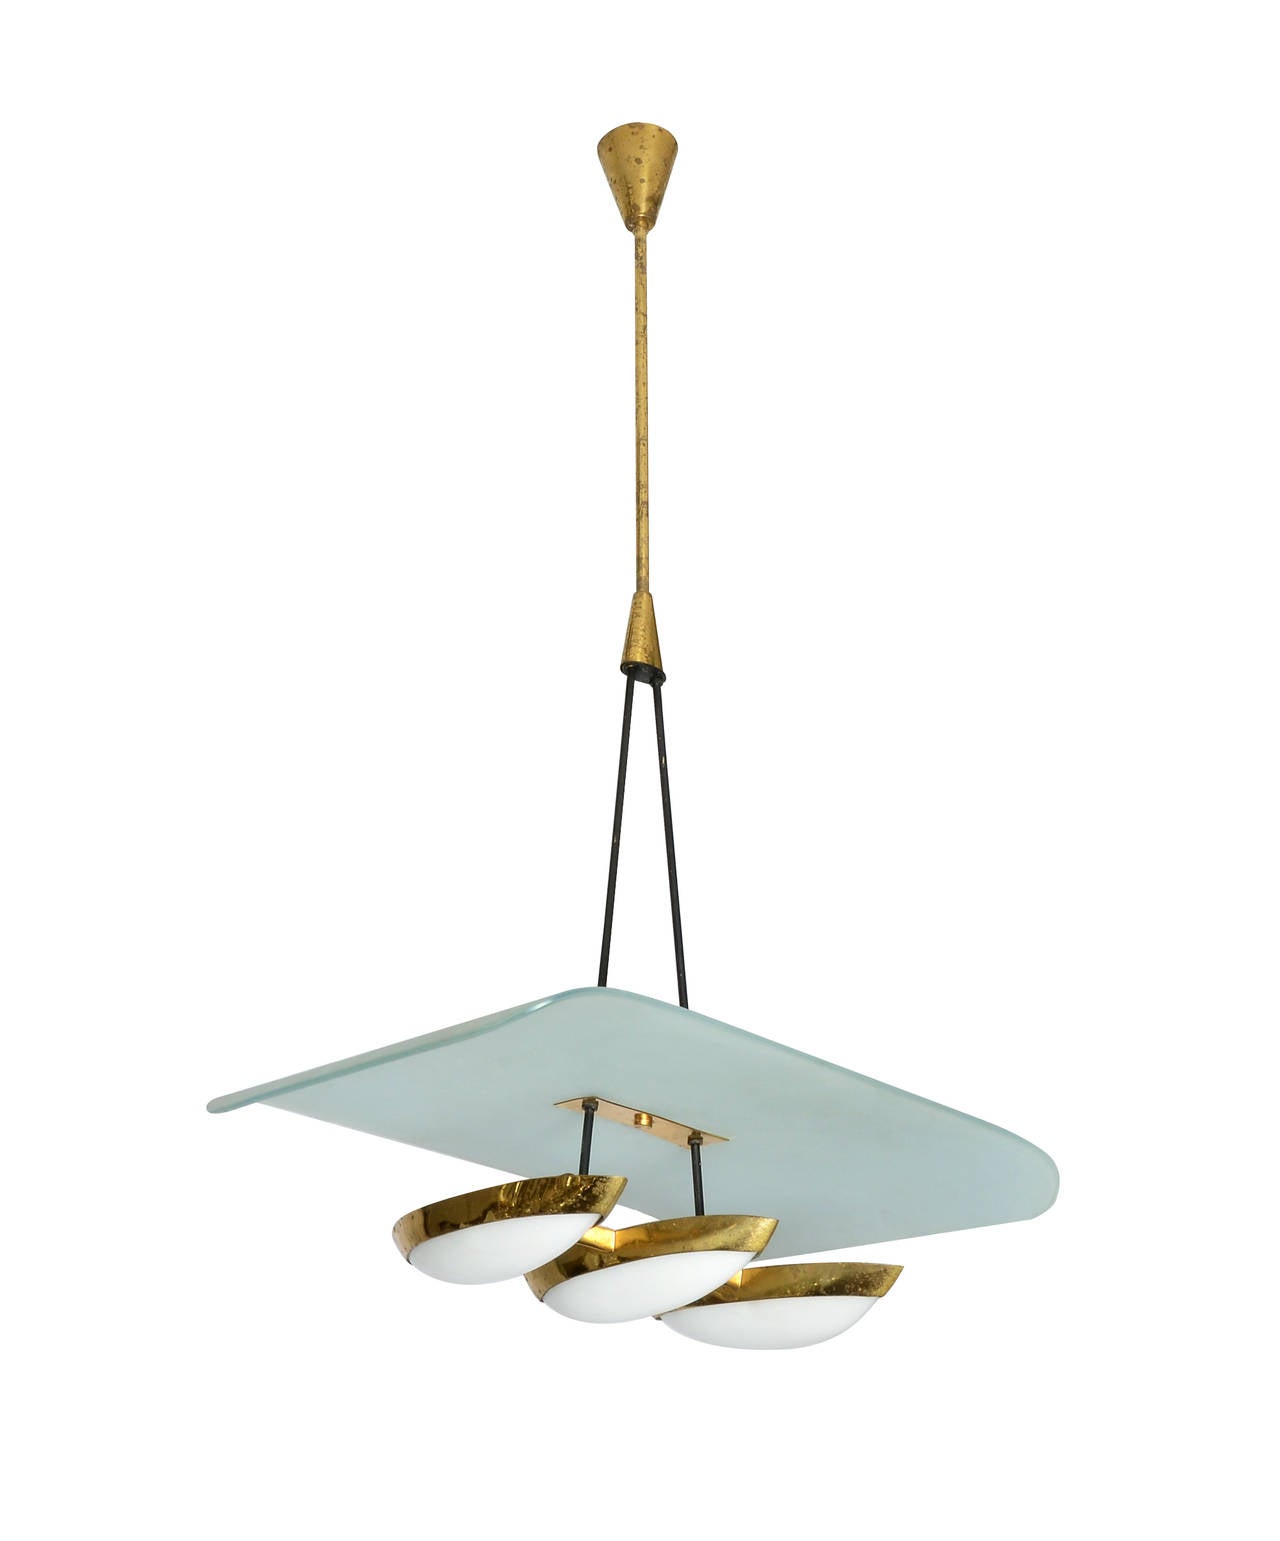 Magnificent suspension chandelier by Arredoluce Monza circa 1953.  Three polished brass up-lights with perspex lenses seem like pontoons bearing aloft the frosted glass reflector.  Suspended from polished brass and black enamaled brass structure.